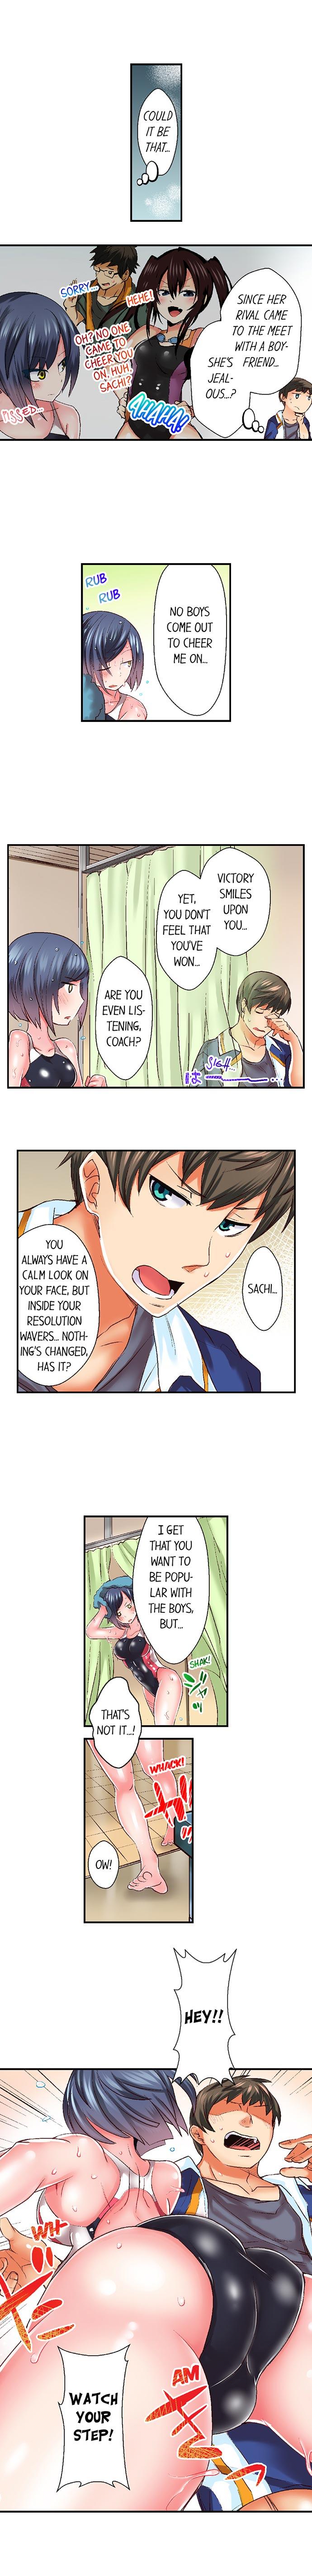 Twink Athlete's Strong Sex Drive Ch. 1 - 12 Highschool - Page 8